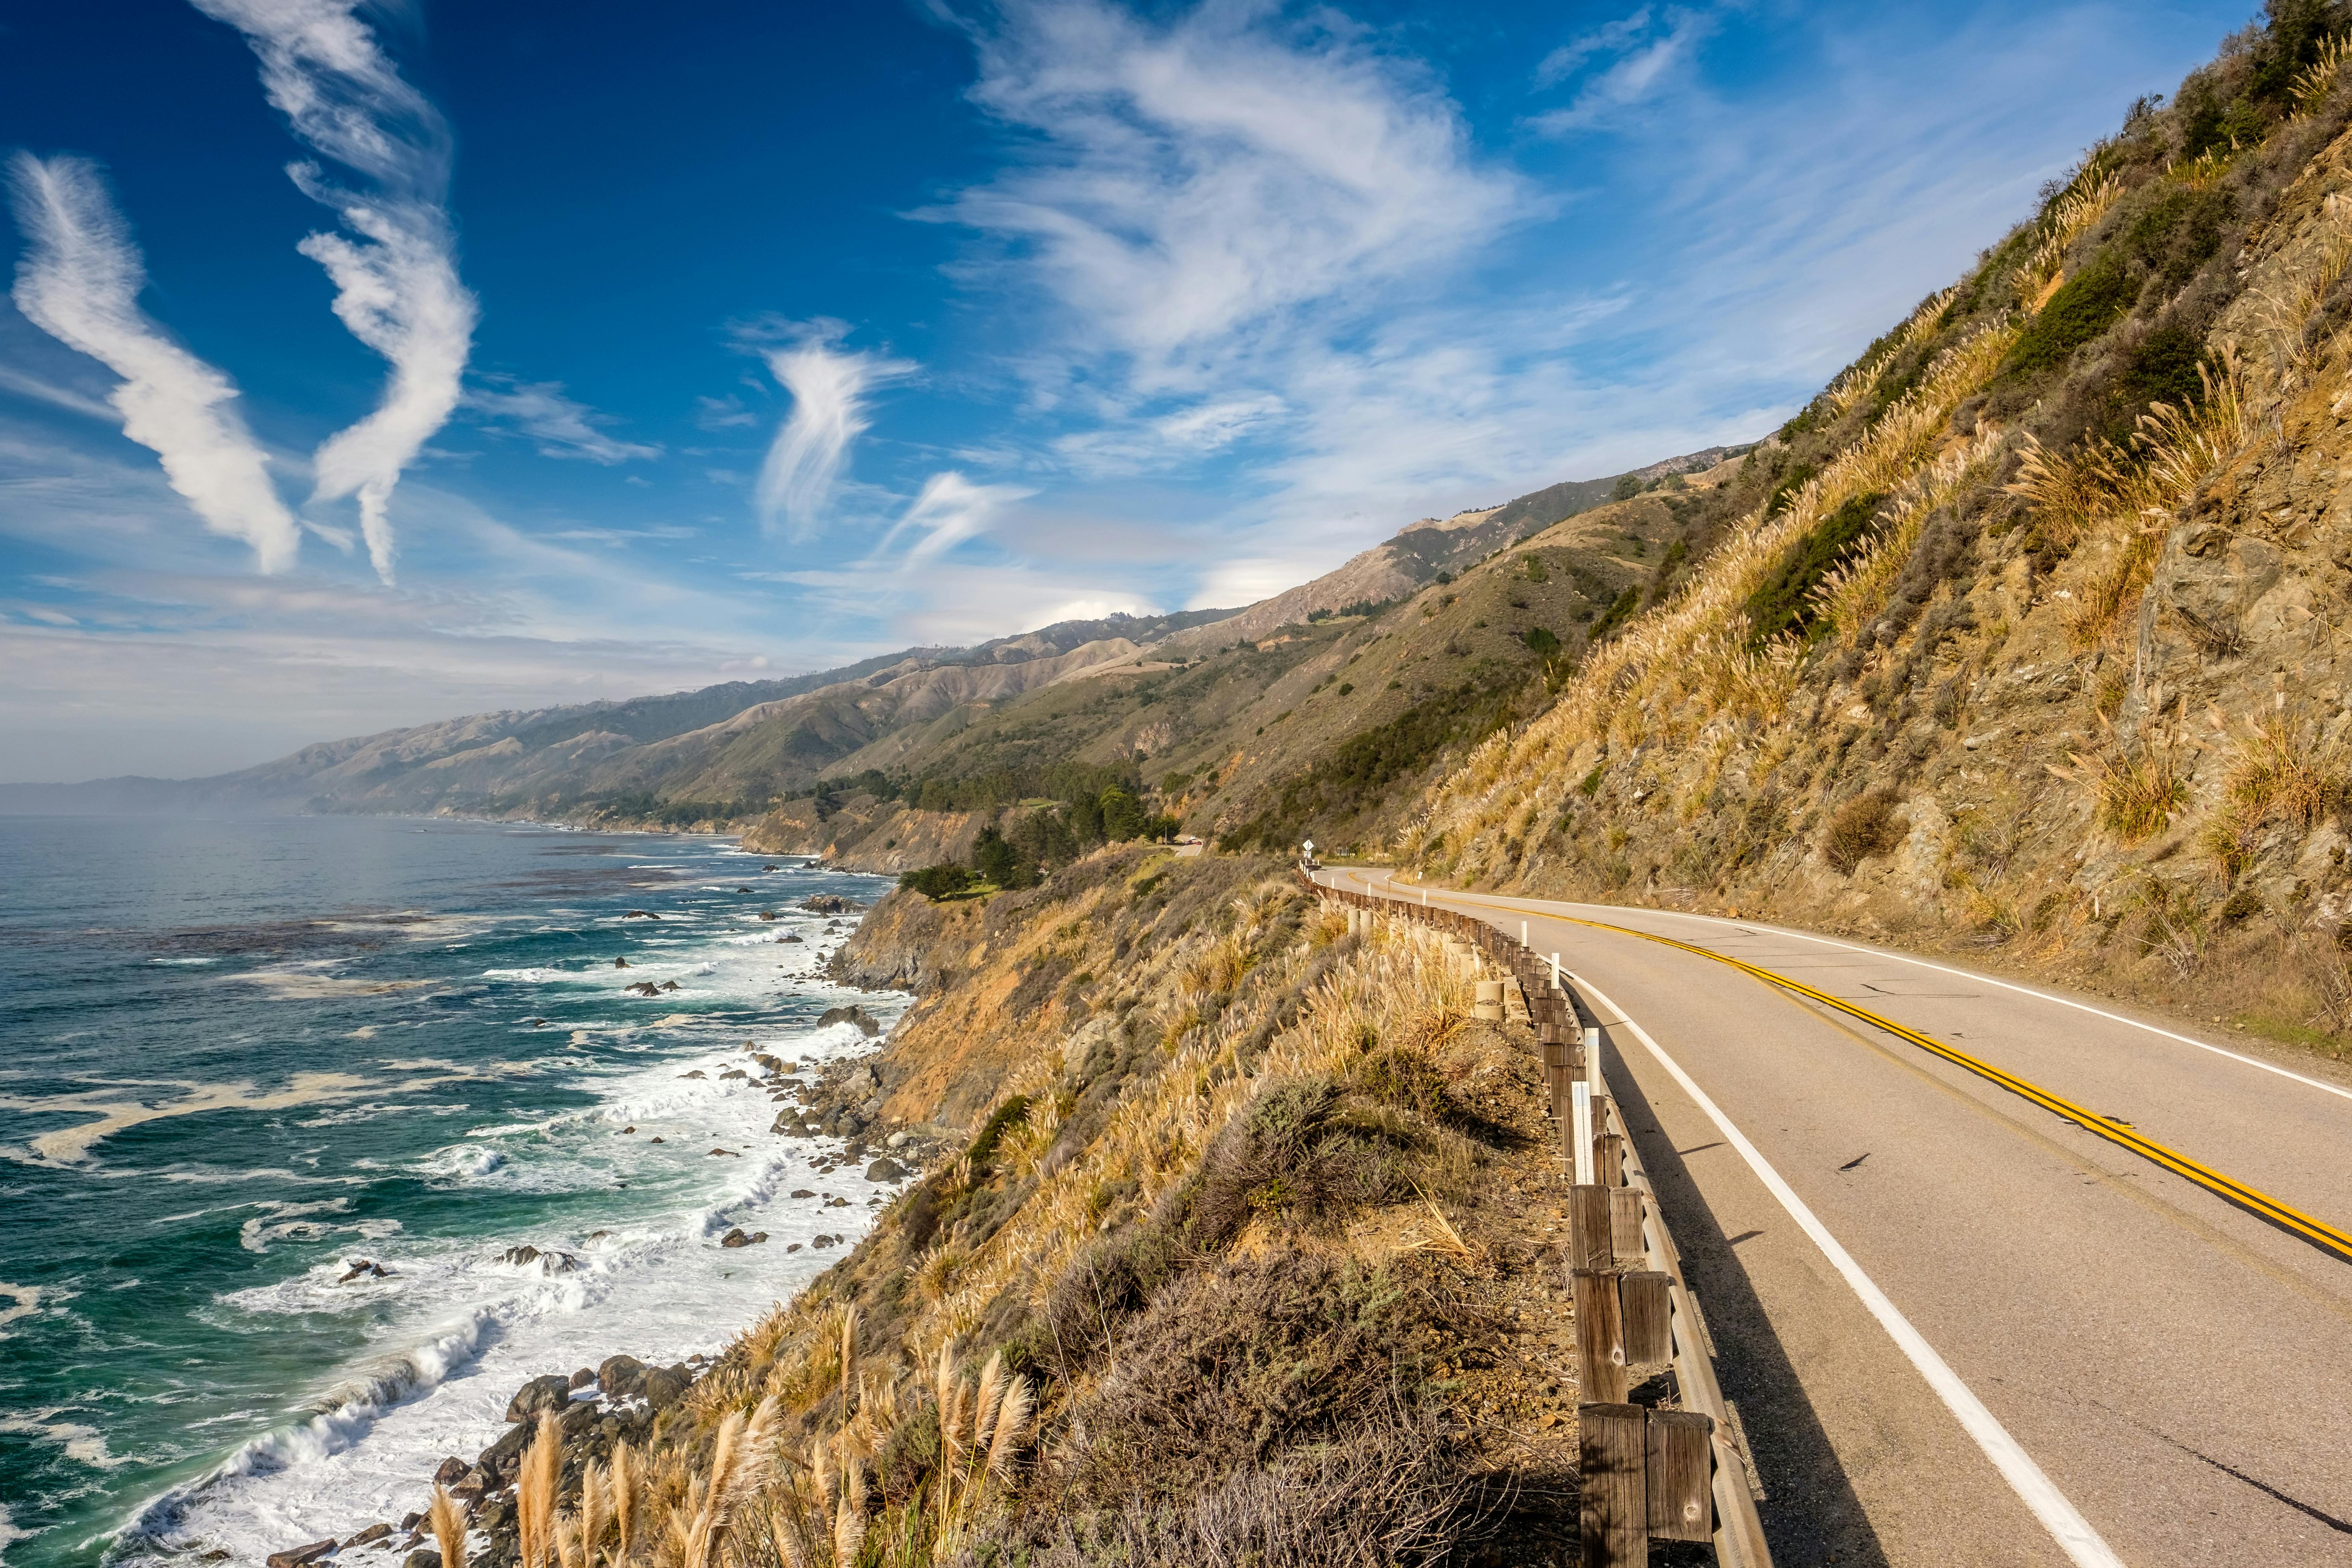 PCH motorcycle ride best motorcycle ride in CA